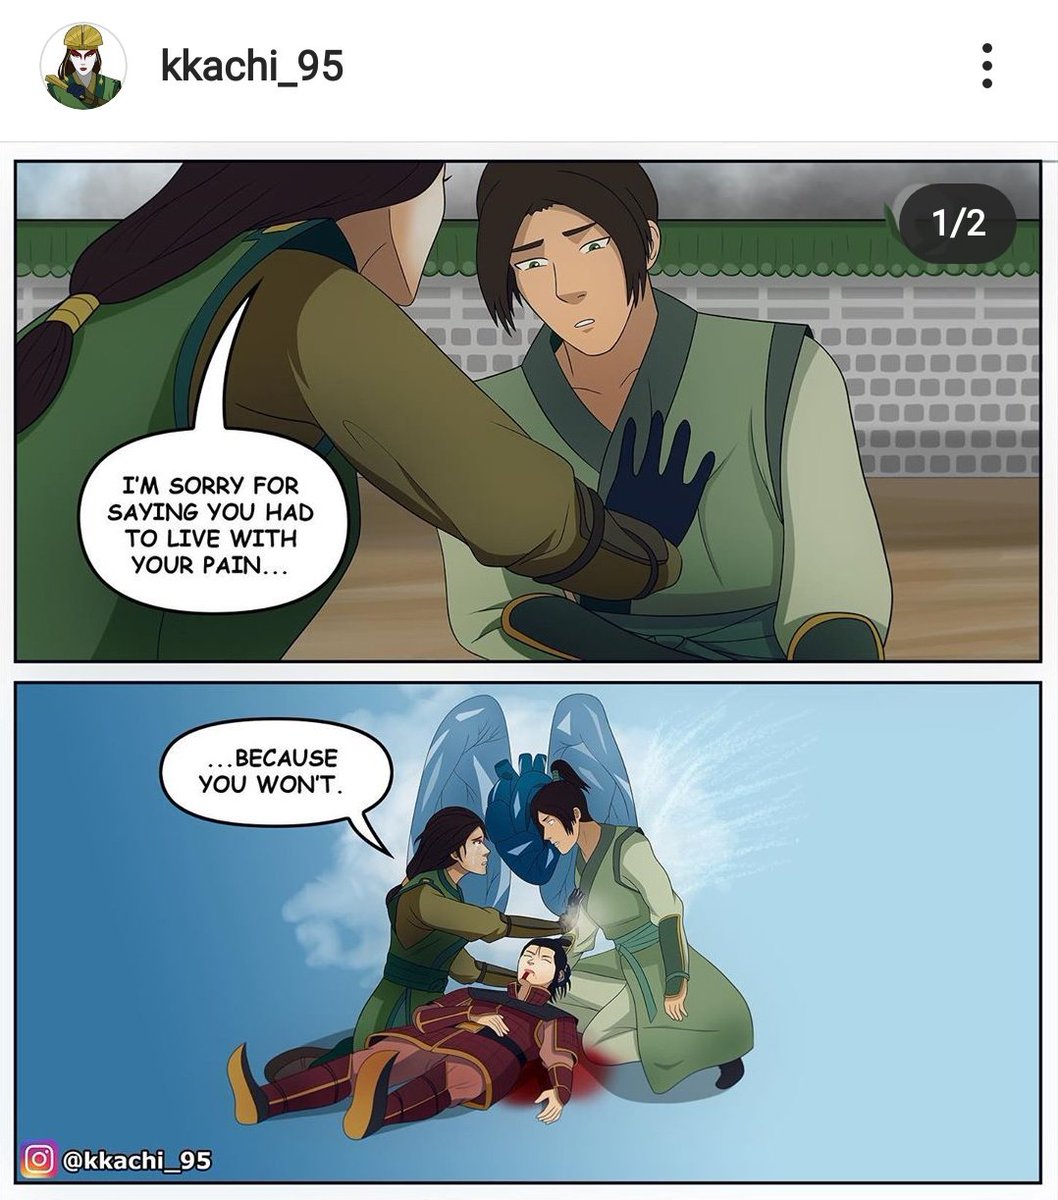 When Kyoshi had to k word his former friend by freezing his heart (art by  @kkachi_95 for this really amazing fanarts from kyoshi novels )